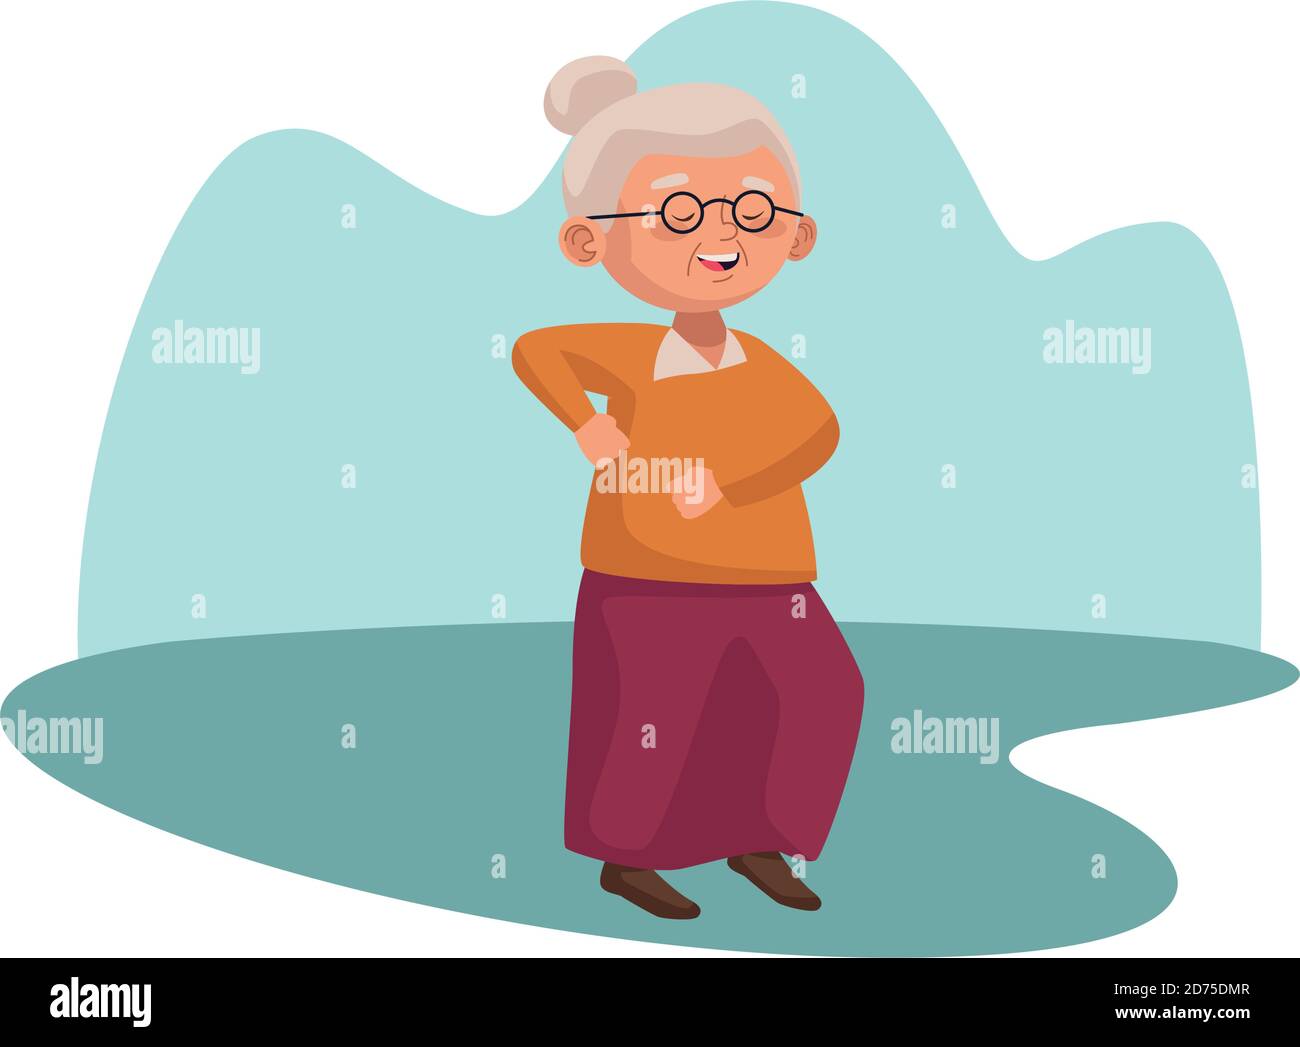 cute old woman dancing character vector illustration design Stock Vector